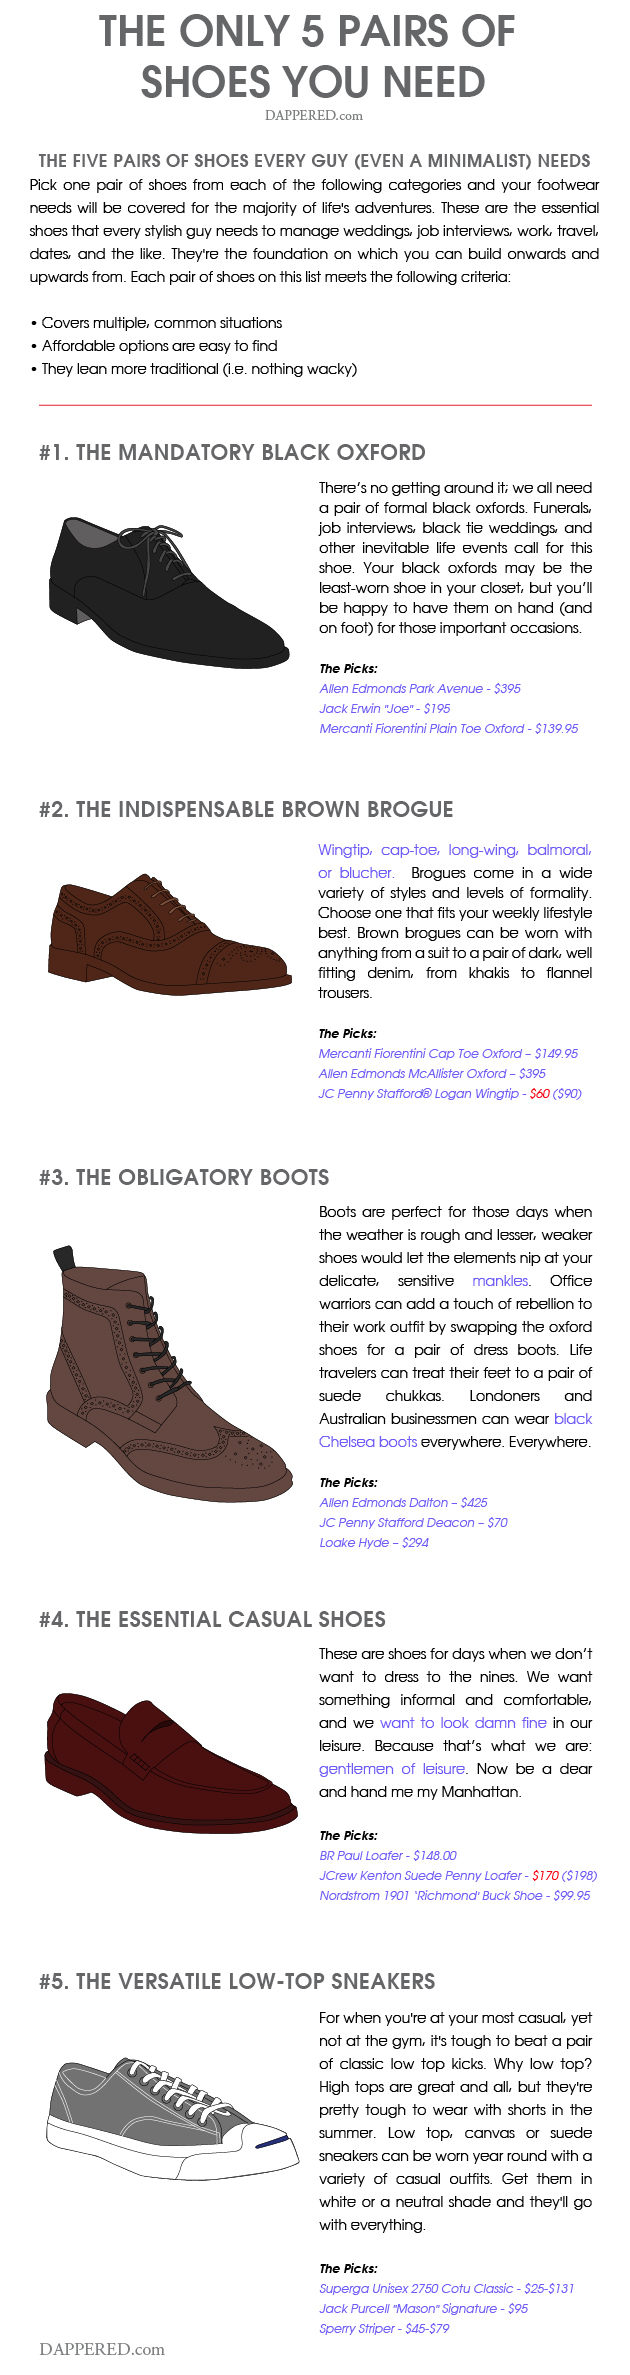 The 5 Types of Shoes Every Guy Needs | Dappered.com